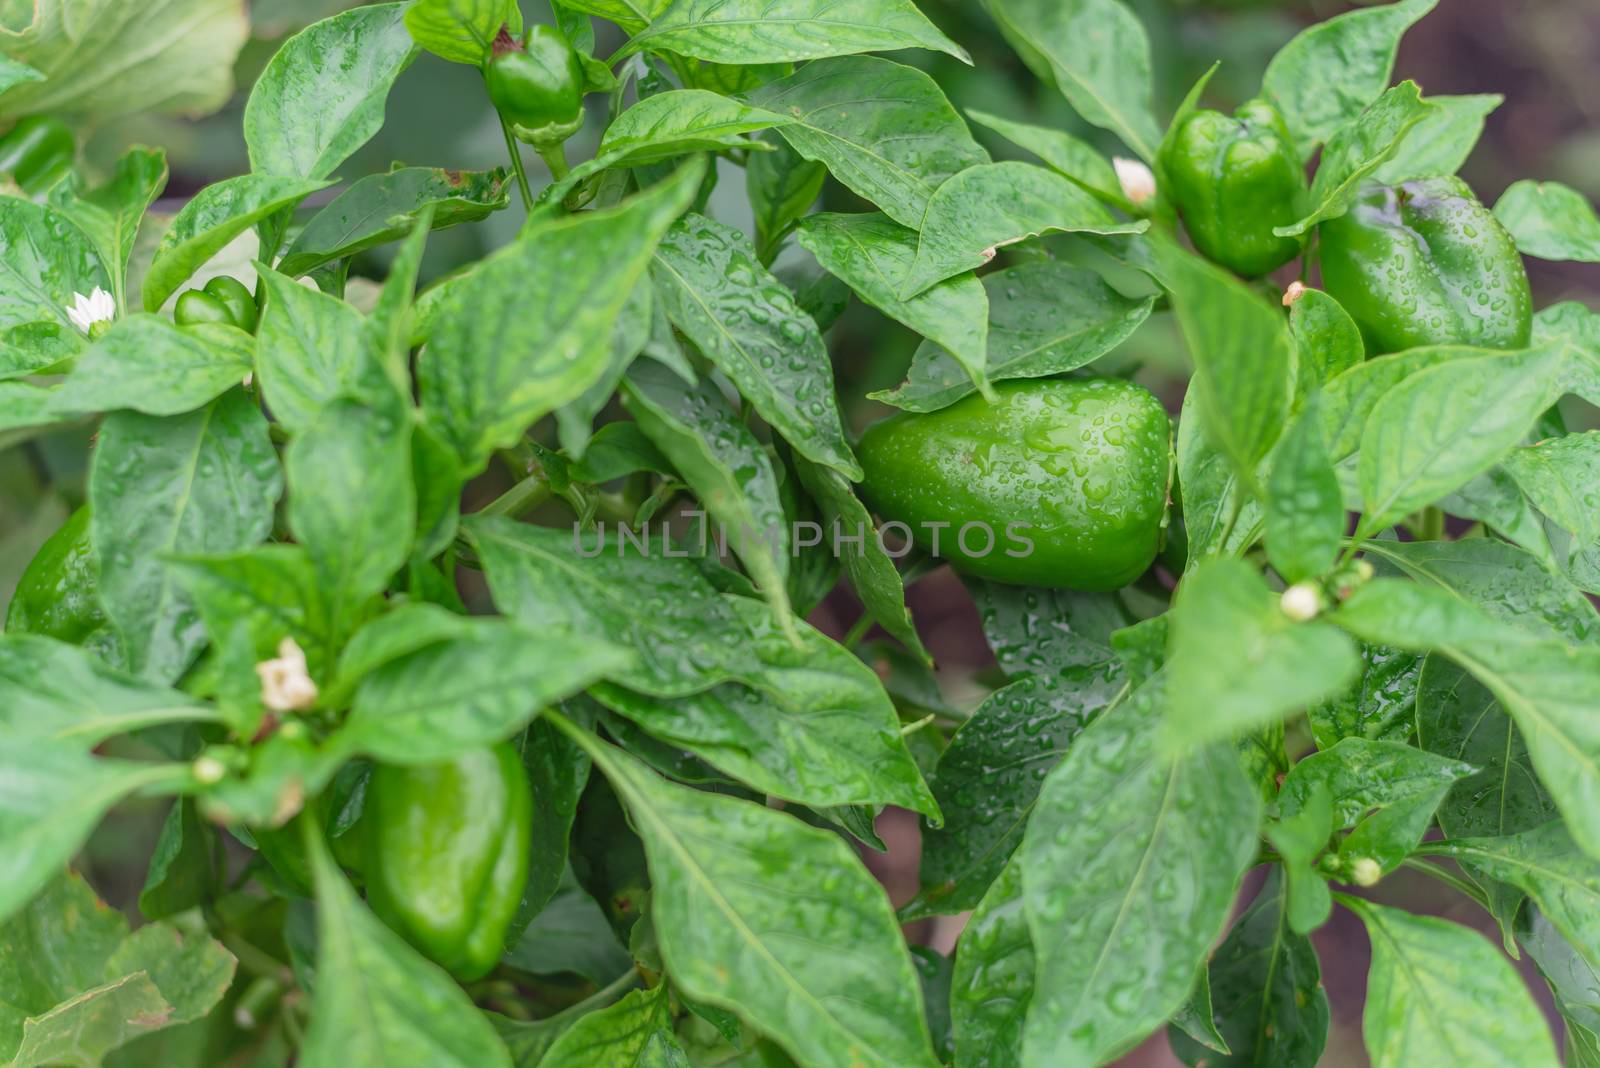 Organic large green bell peppers with flower and water drop ready to harvest by trongnguyen